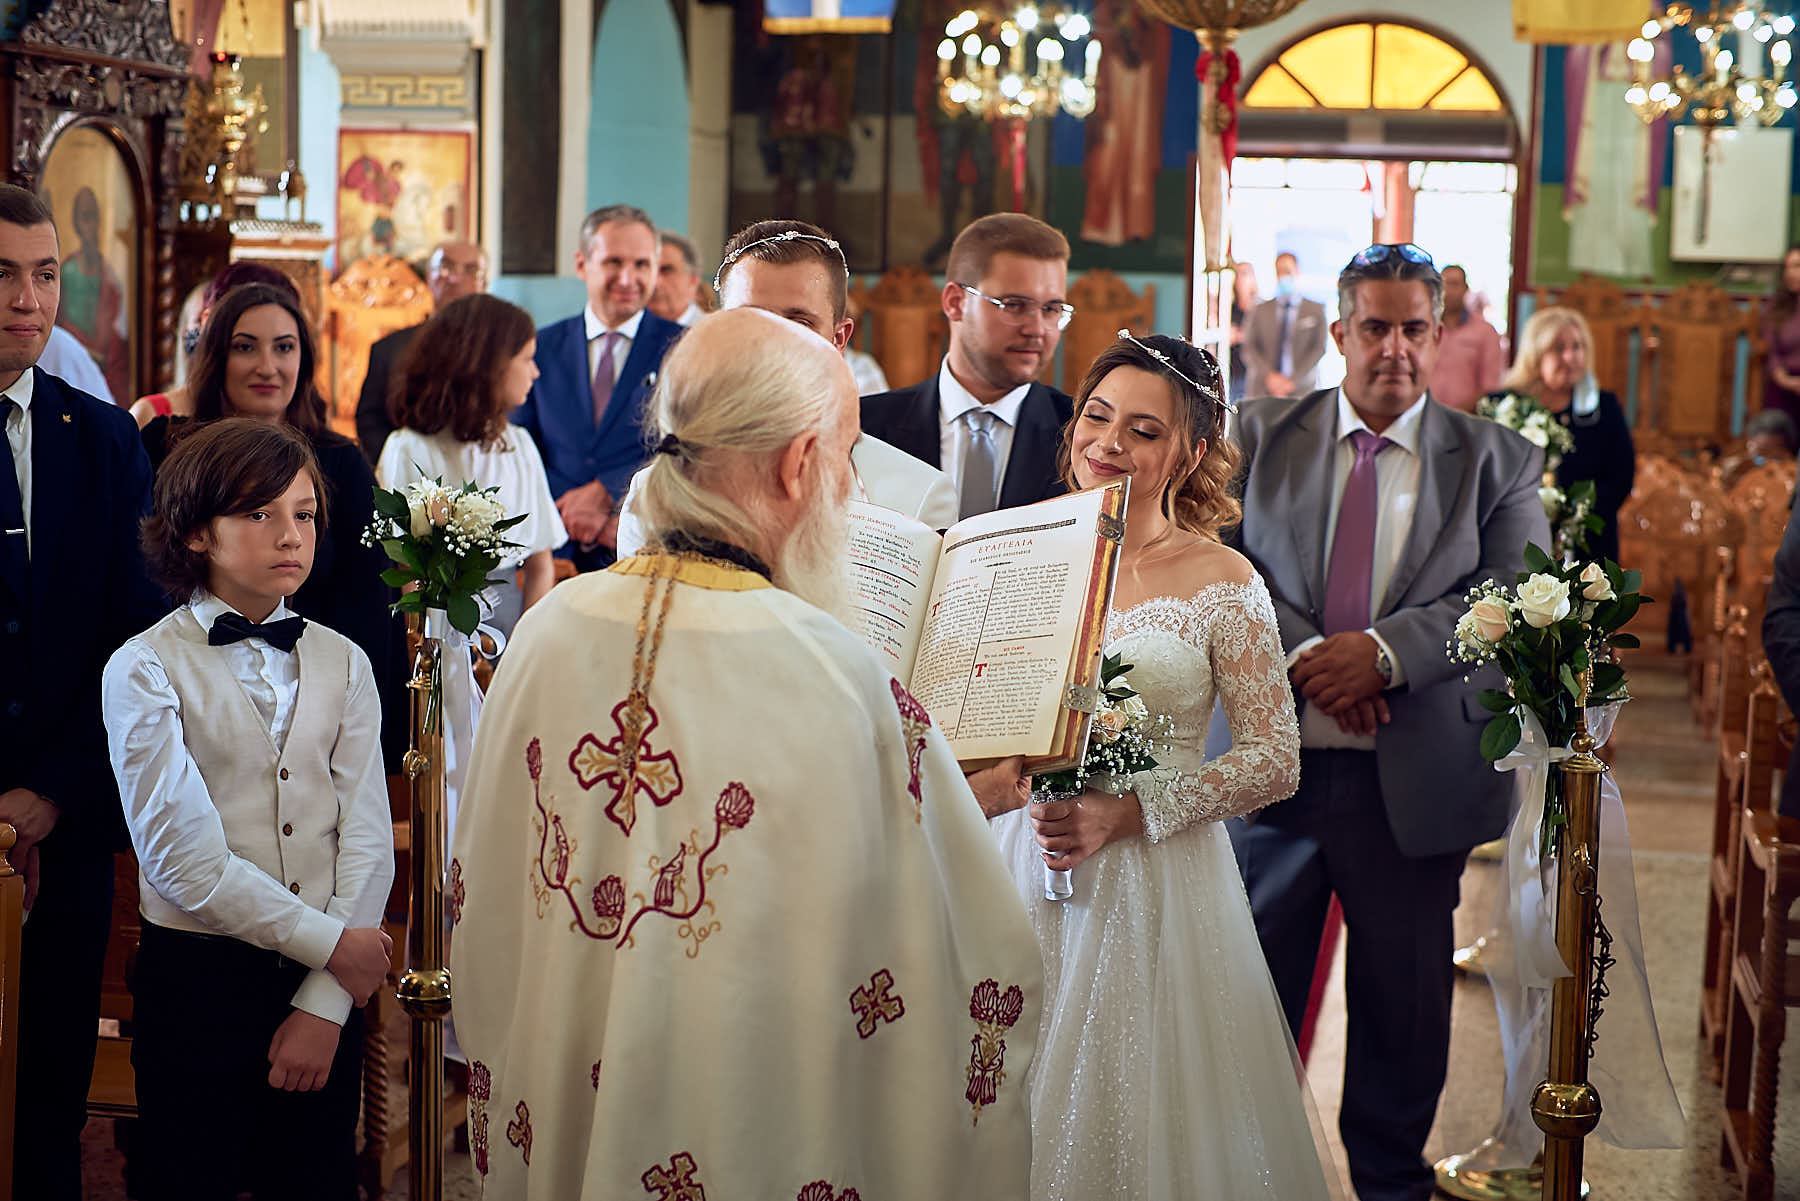 Priest reading the psalms, bride looking at peace, various people in the background